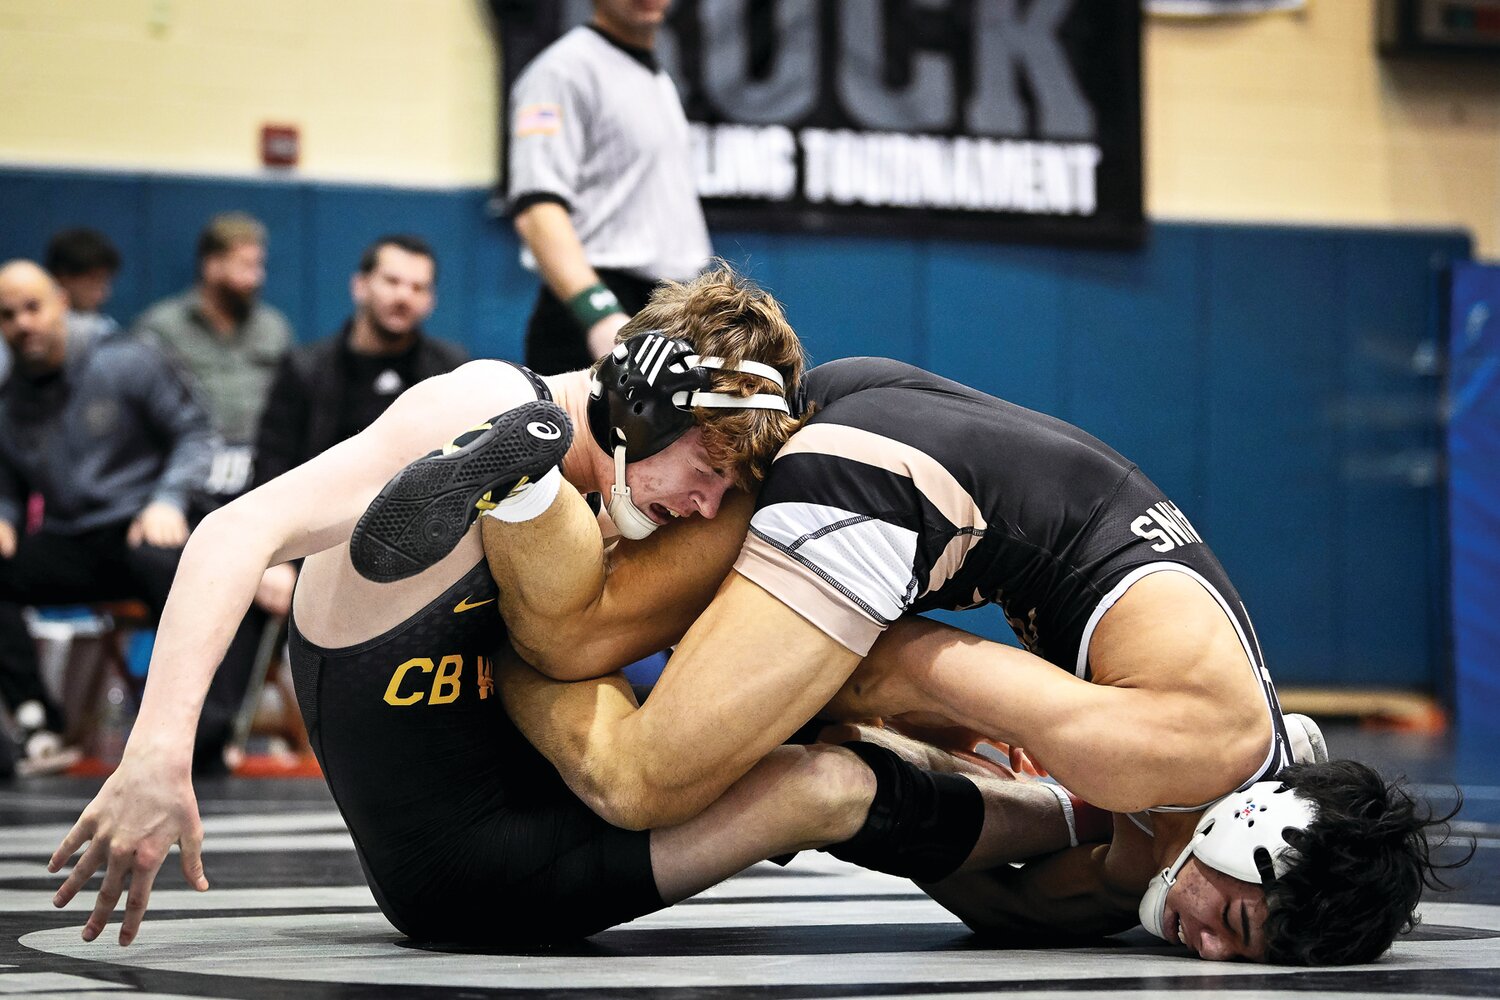 Central Bucks West’s Patrick Kelly battles Dylan Ross of Paramus Catholic in a 139-pound weight match won by Ross 10-2.